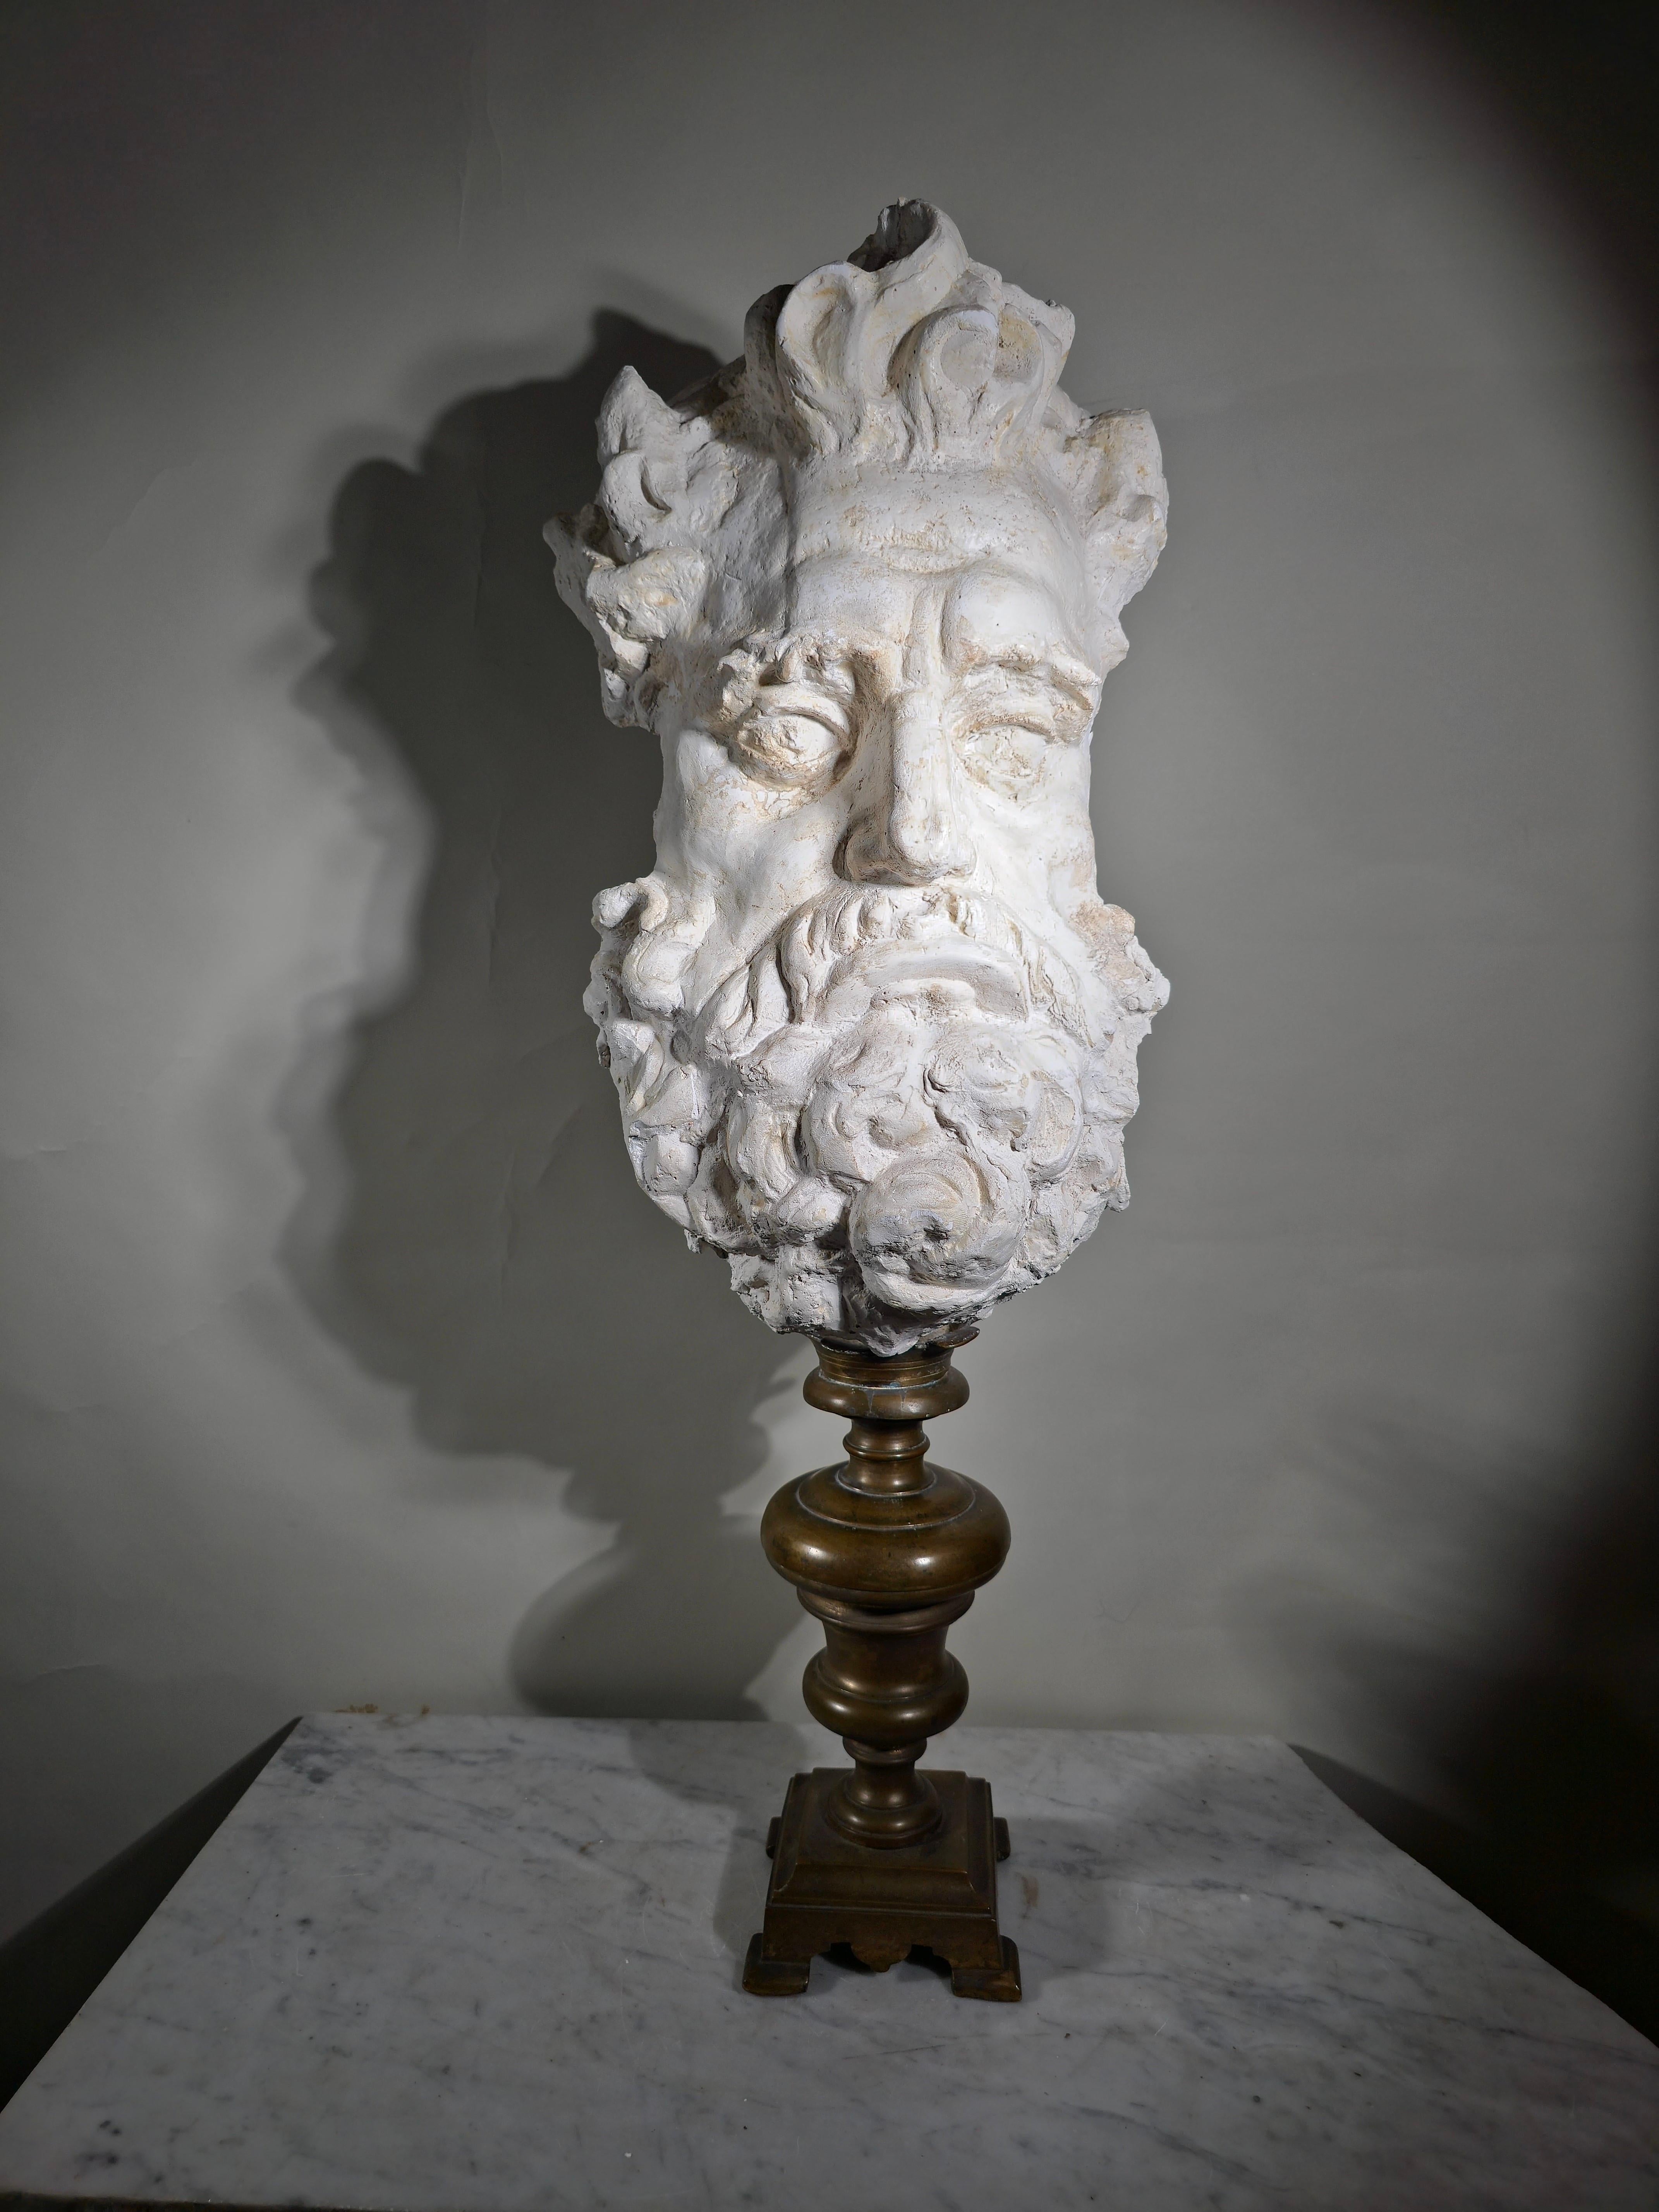 This spectacular plaster sculpture, depicting the majestic face of Zeus, is a true gem from the 19th century. Crafted in Italy during this era, it captures the imposing presence and divine power of the king of gods from Greek mythology.

The